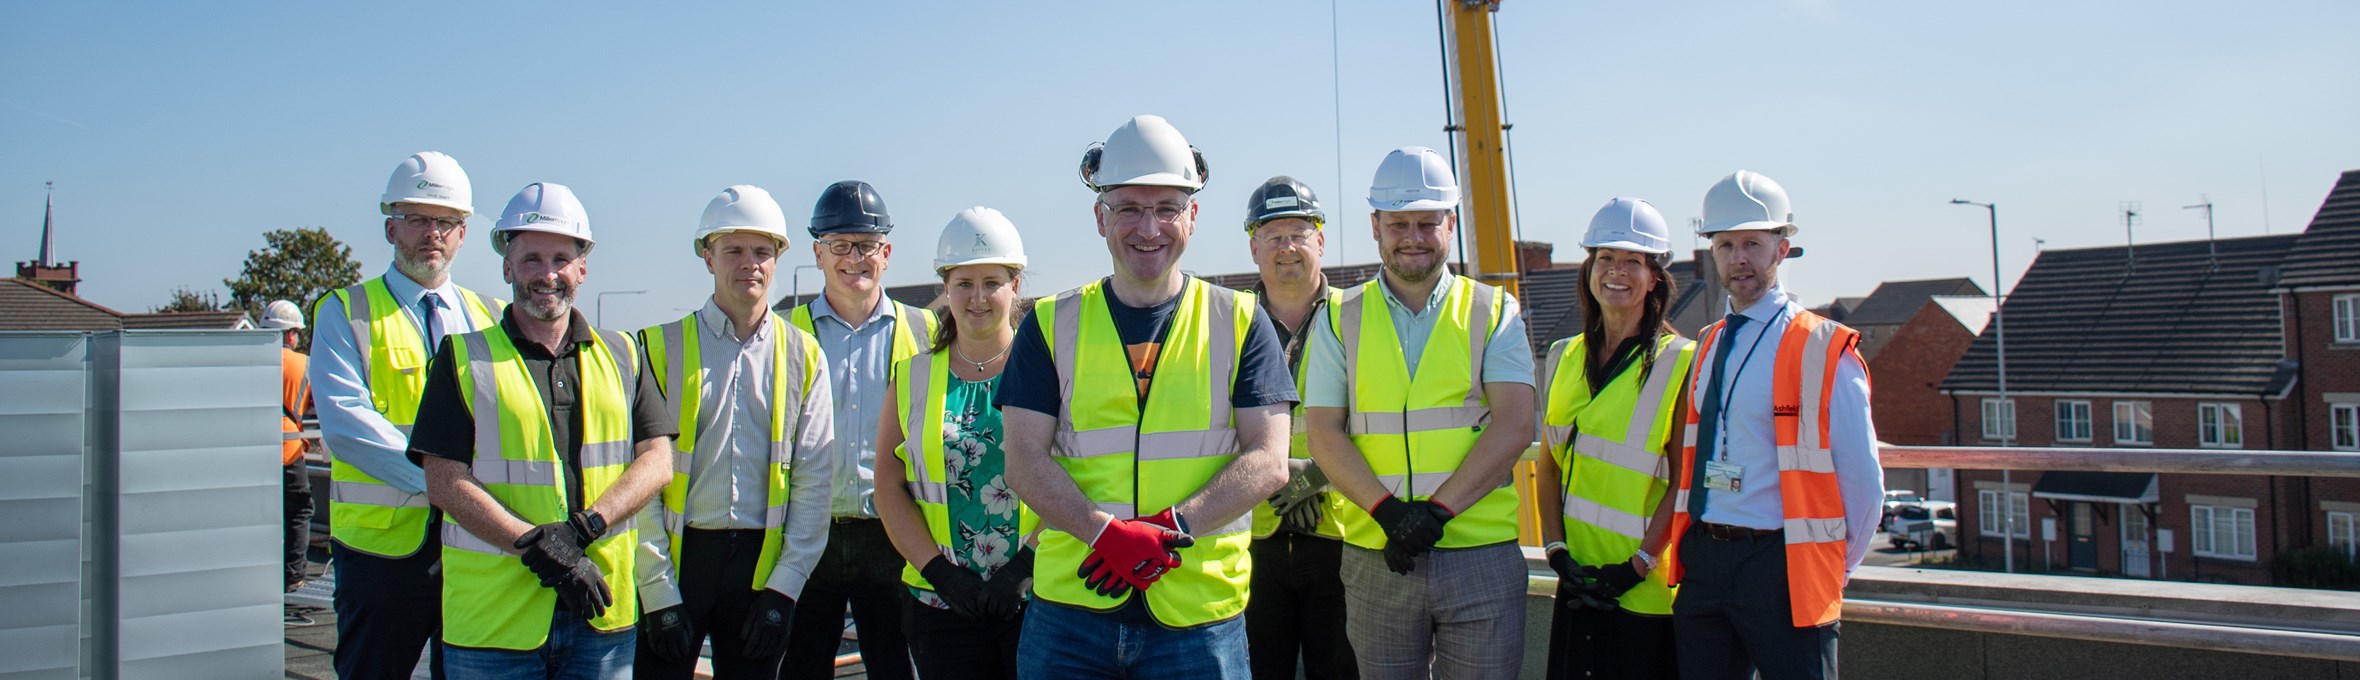 a group of people in high vis vests and hard hats stood on a roof with a crane in the background